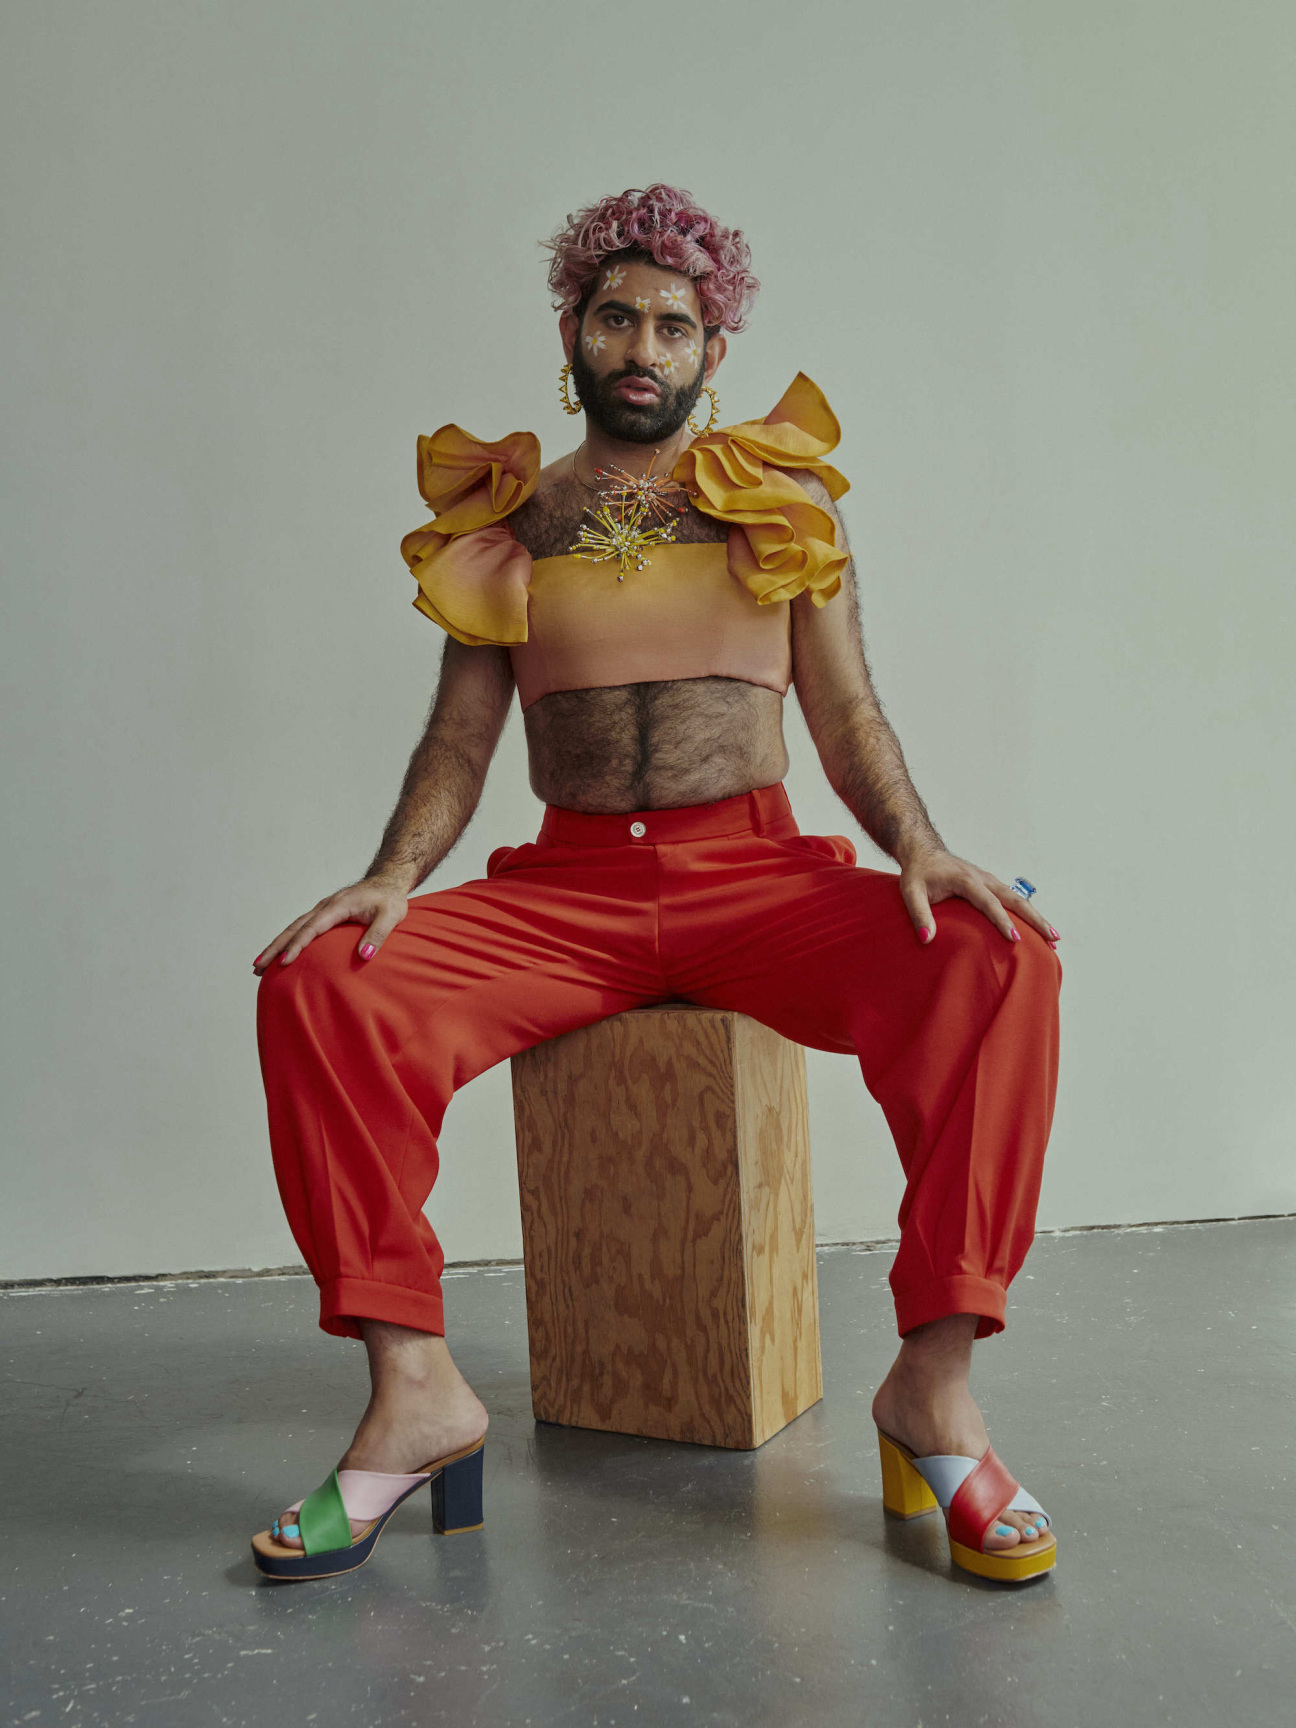 alok vaid menon poses sitting on wood block with legs apart and hands on legs